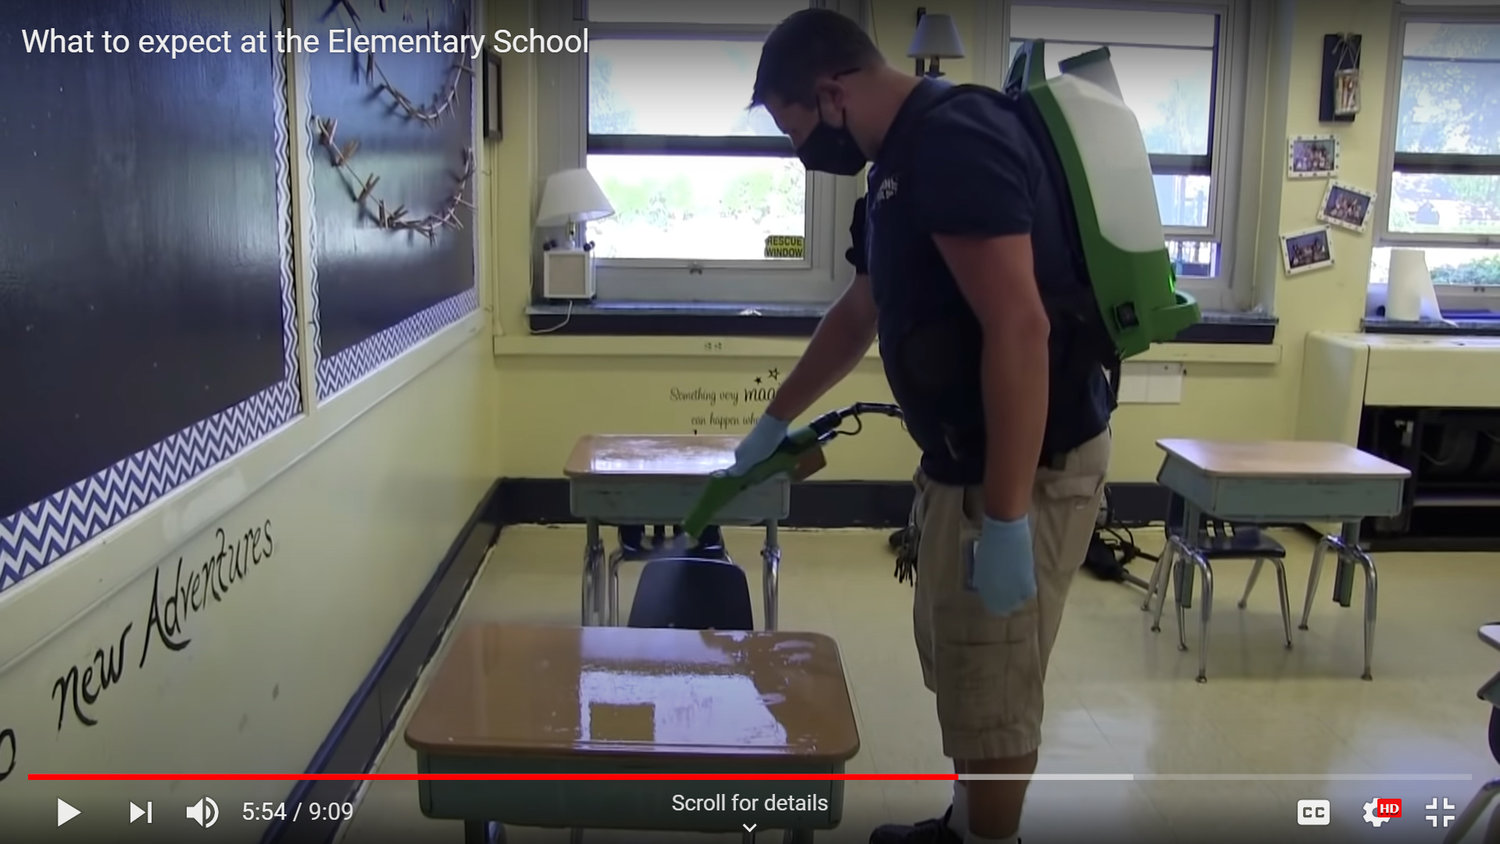 Oceanside School District has purchased electrostatic sprayers to deep clean and sanitize school buildings daily, as shown in recent “What to Expect” videos on the district website.